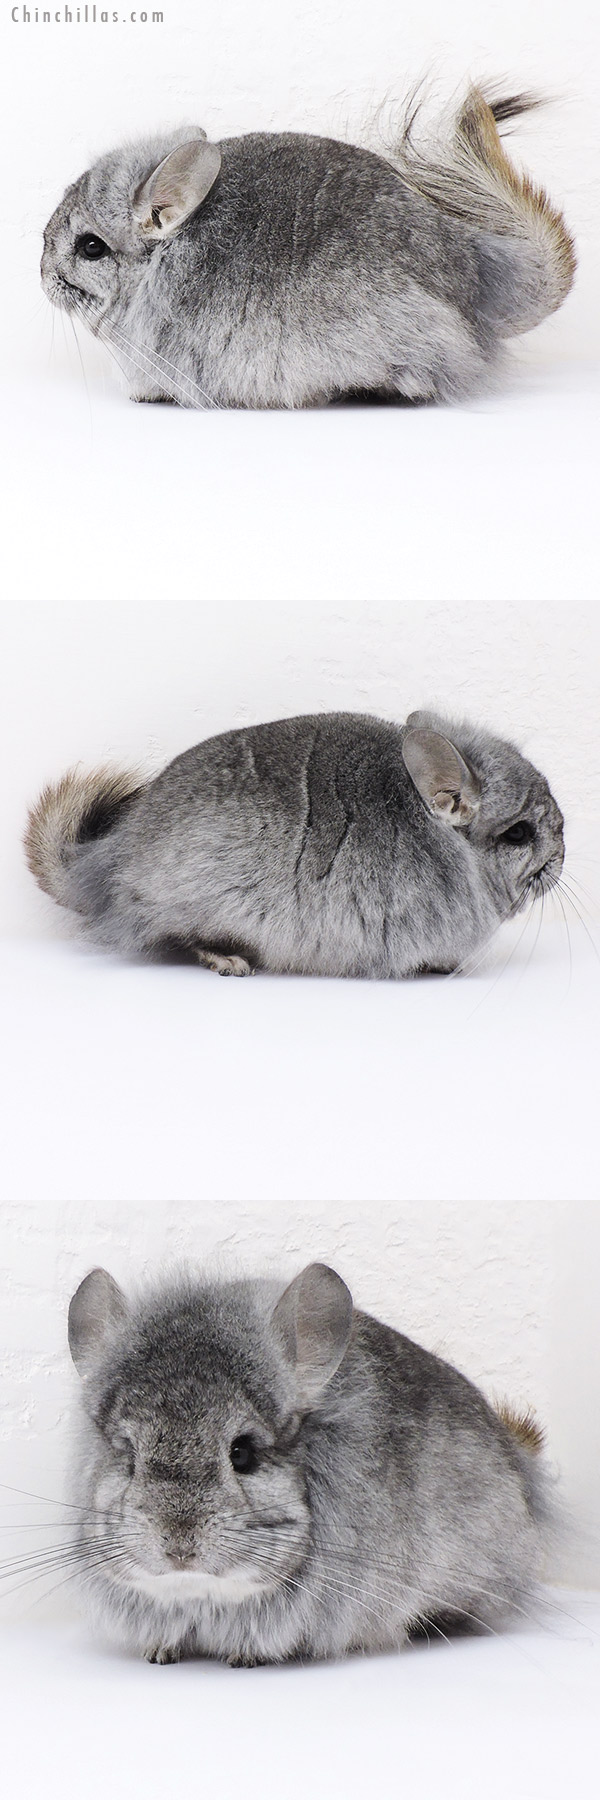 Chinchilla or related item offered for sale or export on Chinchillas.com - 19051 Exceptional Standard G2  Royal Persian Angora Male Chinchilla